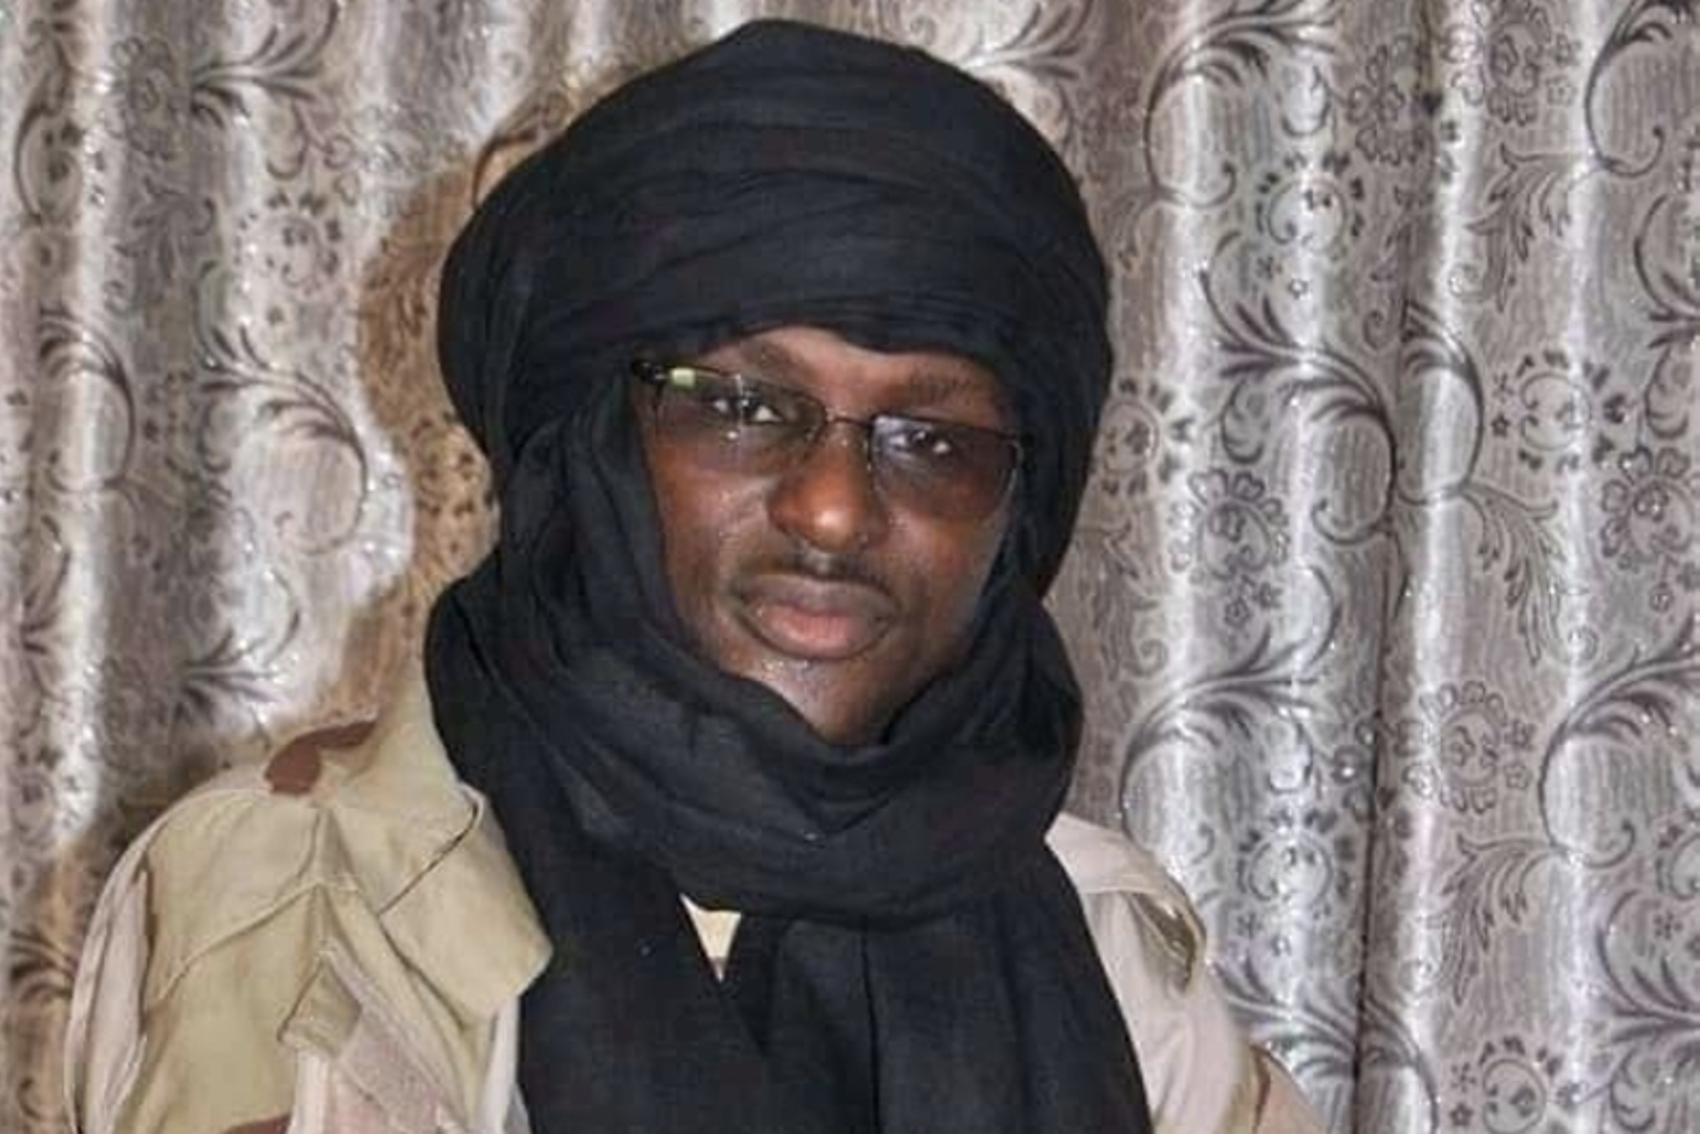 Chad’s new intelligence chief is a close associate of Ali Darassa, a Central African warlord